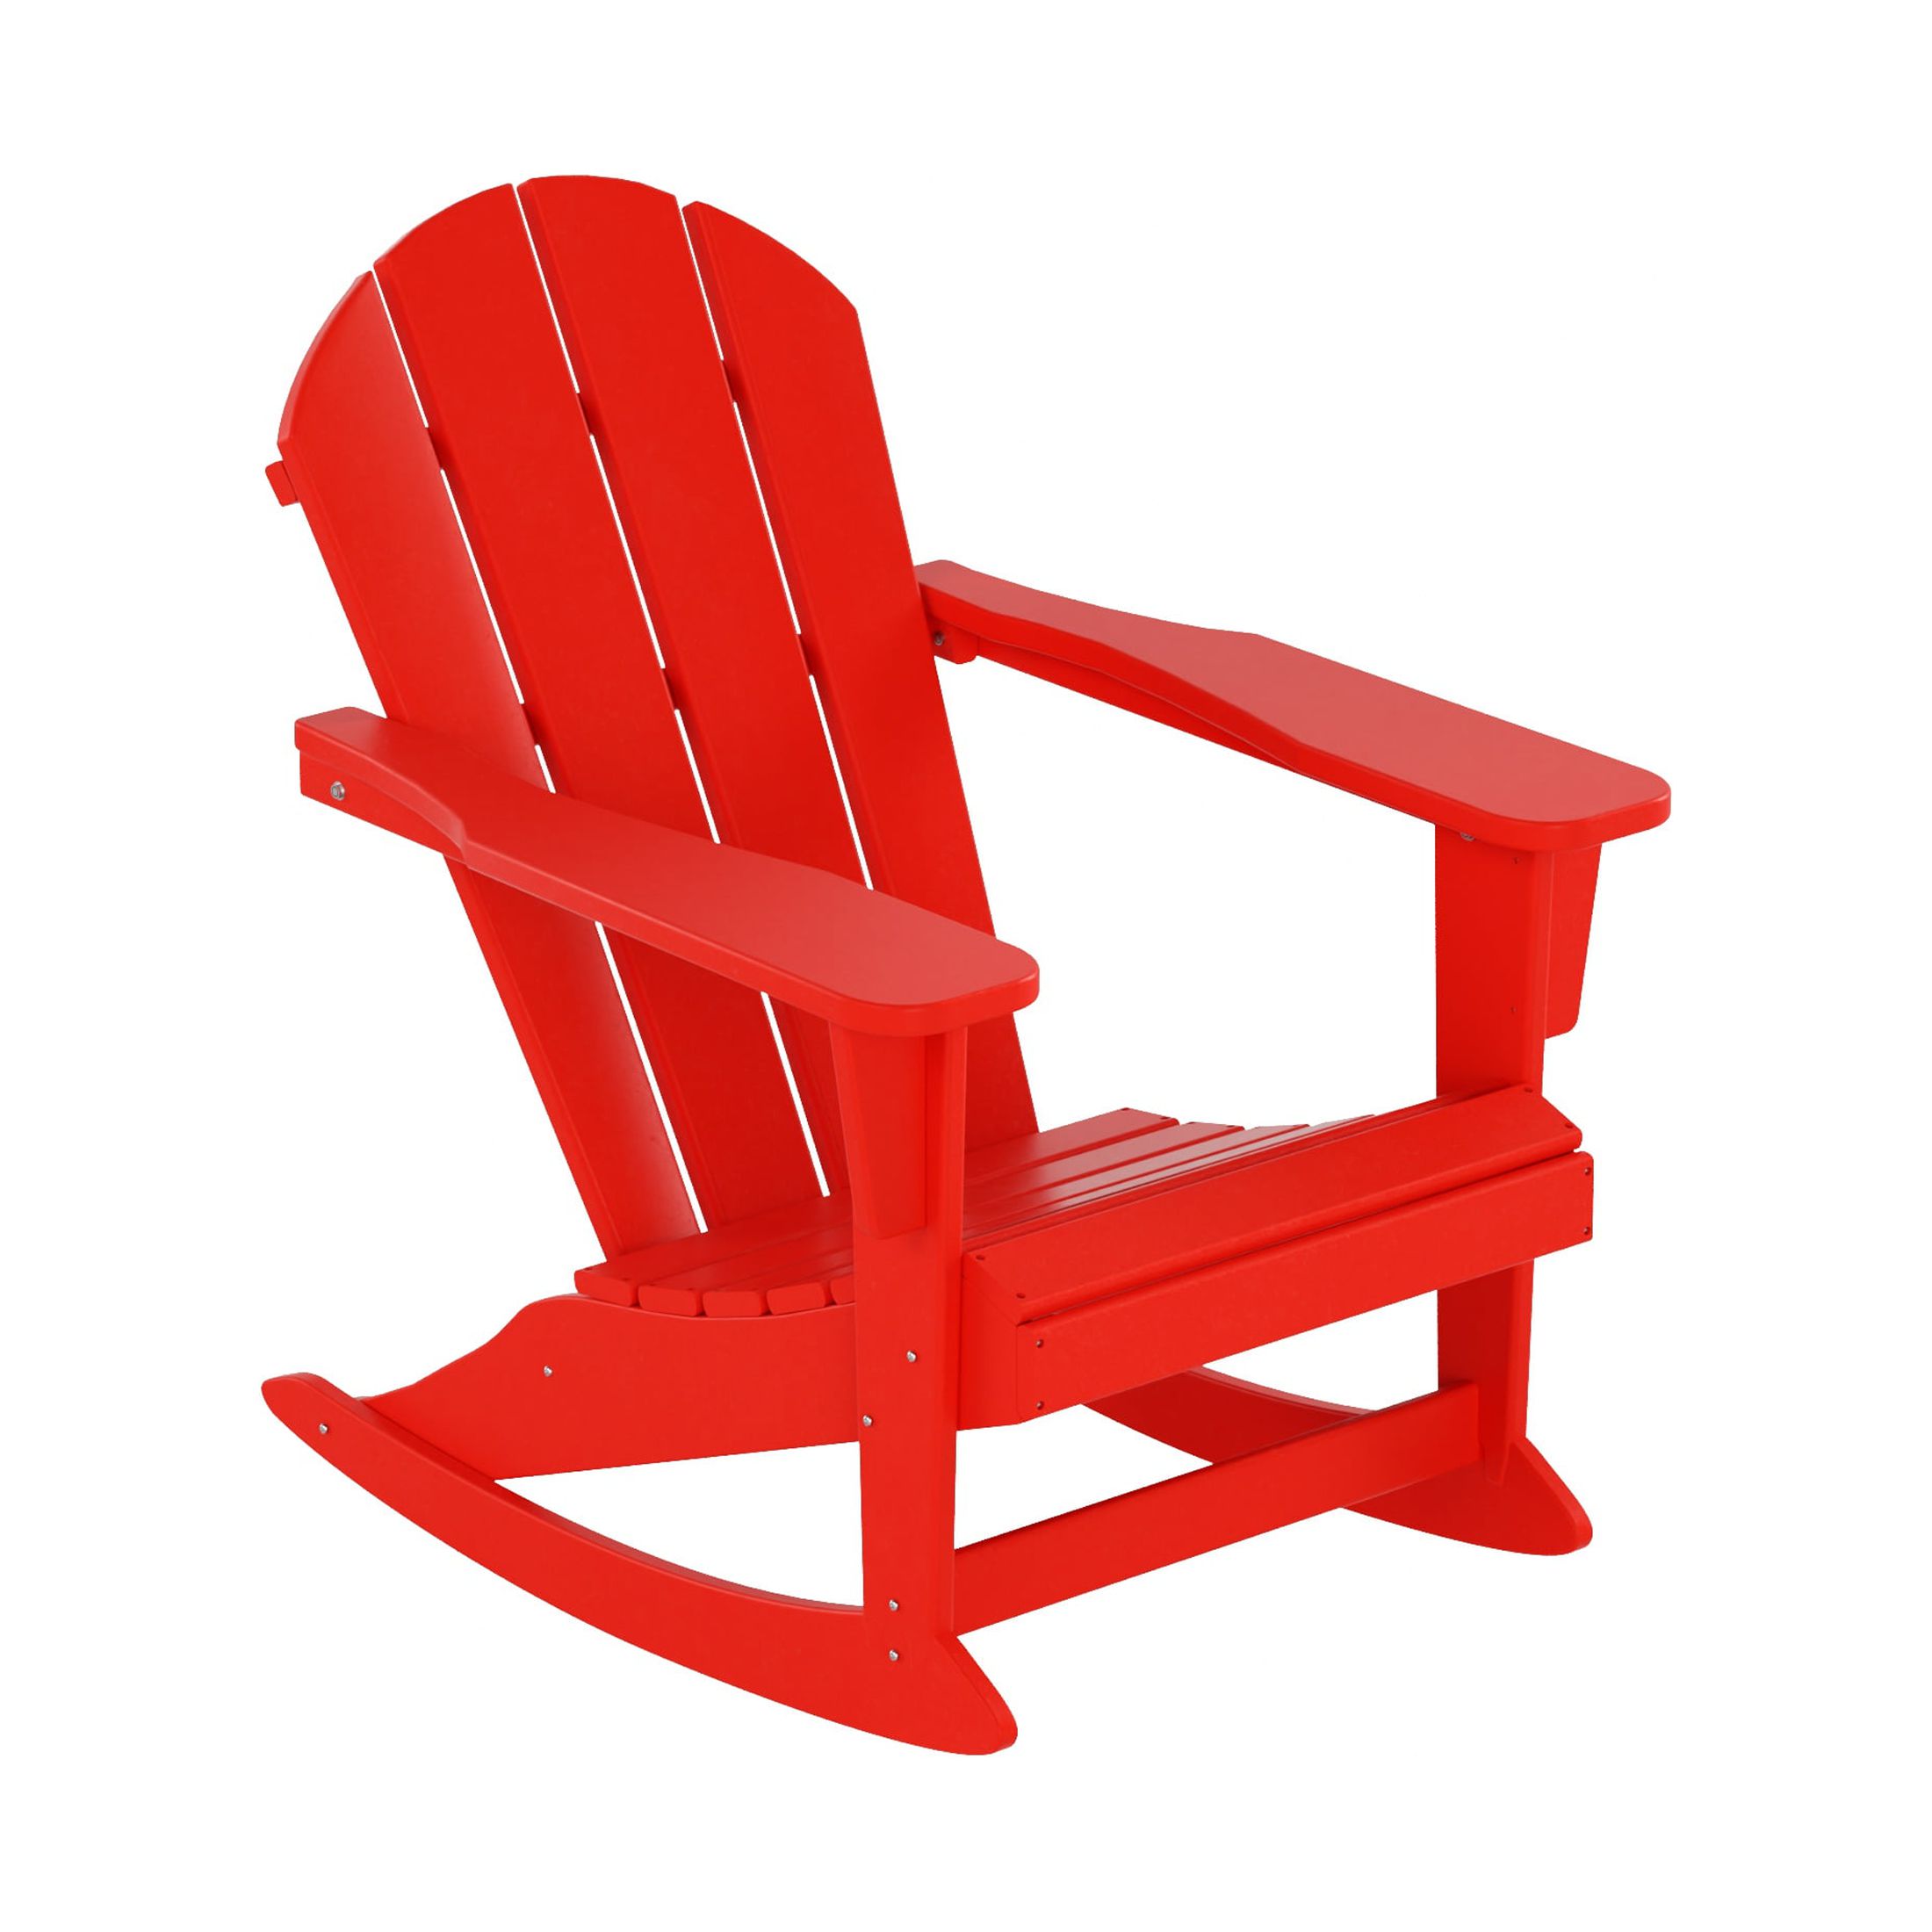 GARDEN 2-Piece Set Plastic Outdoor Rocking Chair with Square Side Table Included, Red - image 3 of 11